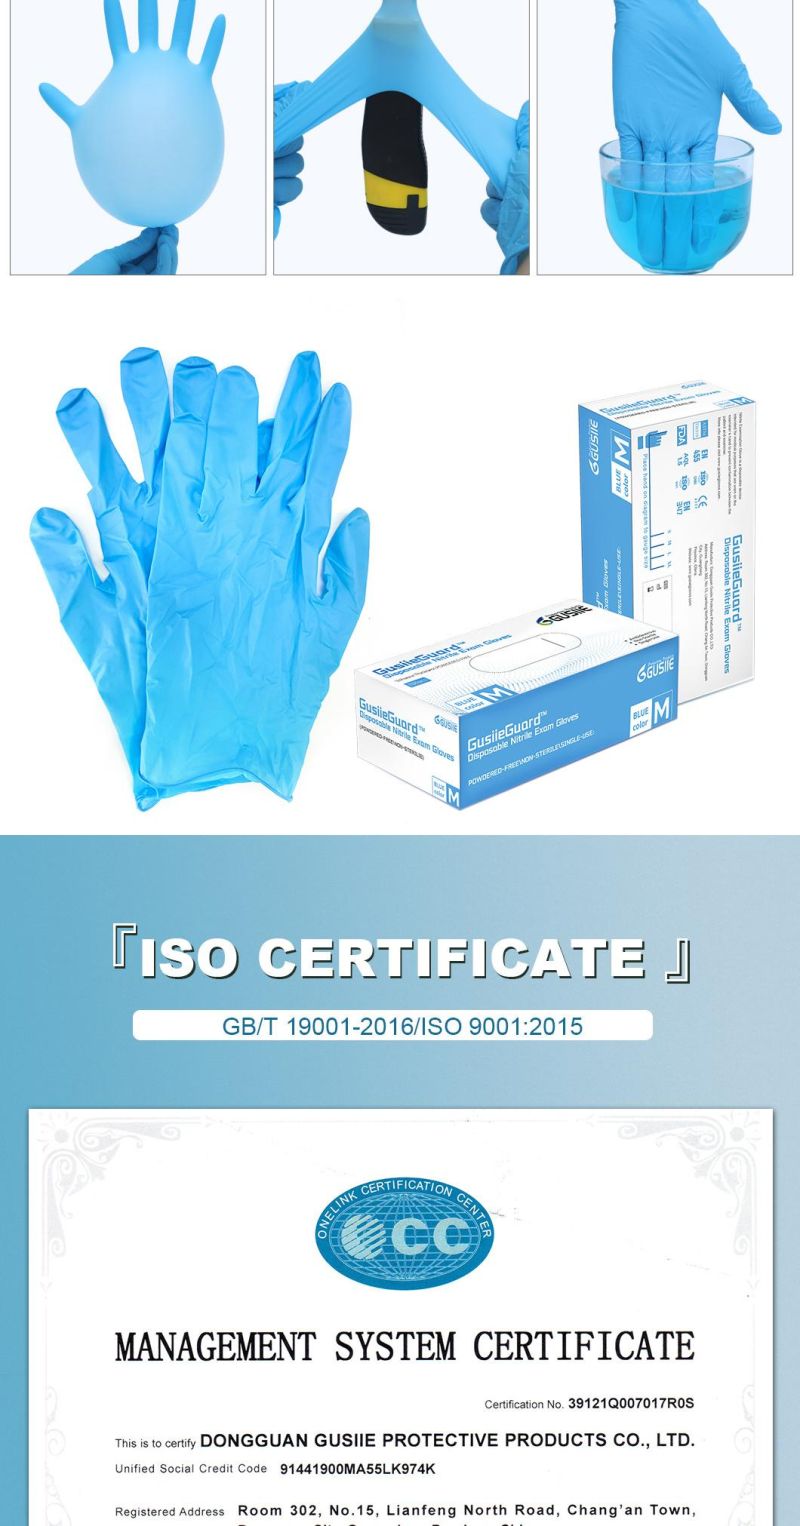 Nitrile Gloves Powder Free Medical Grade Disposable with High Quality